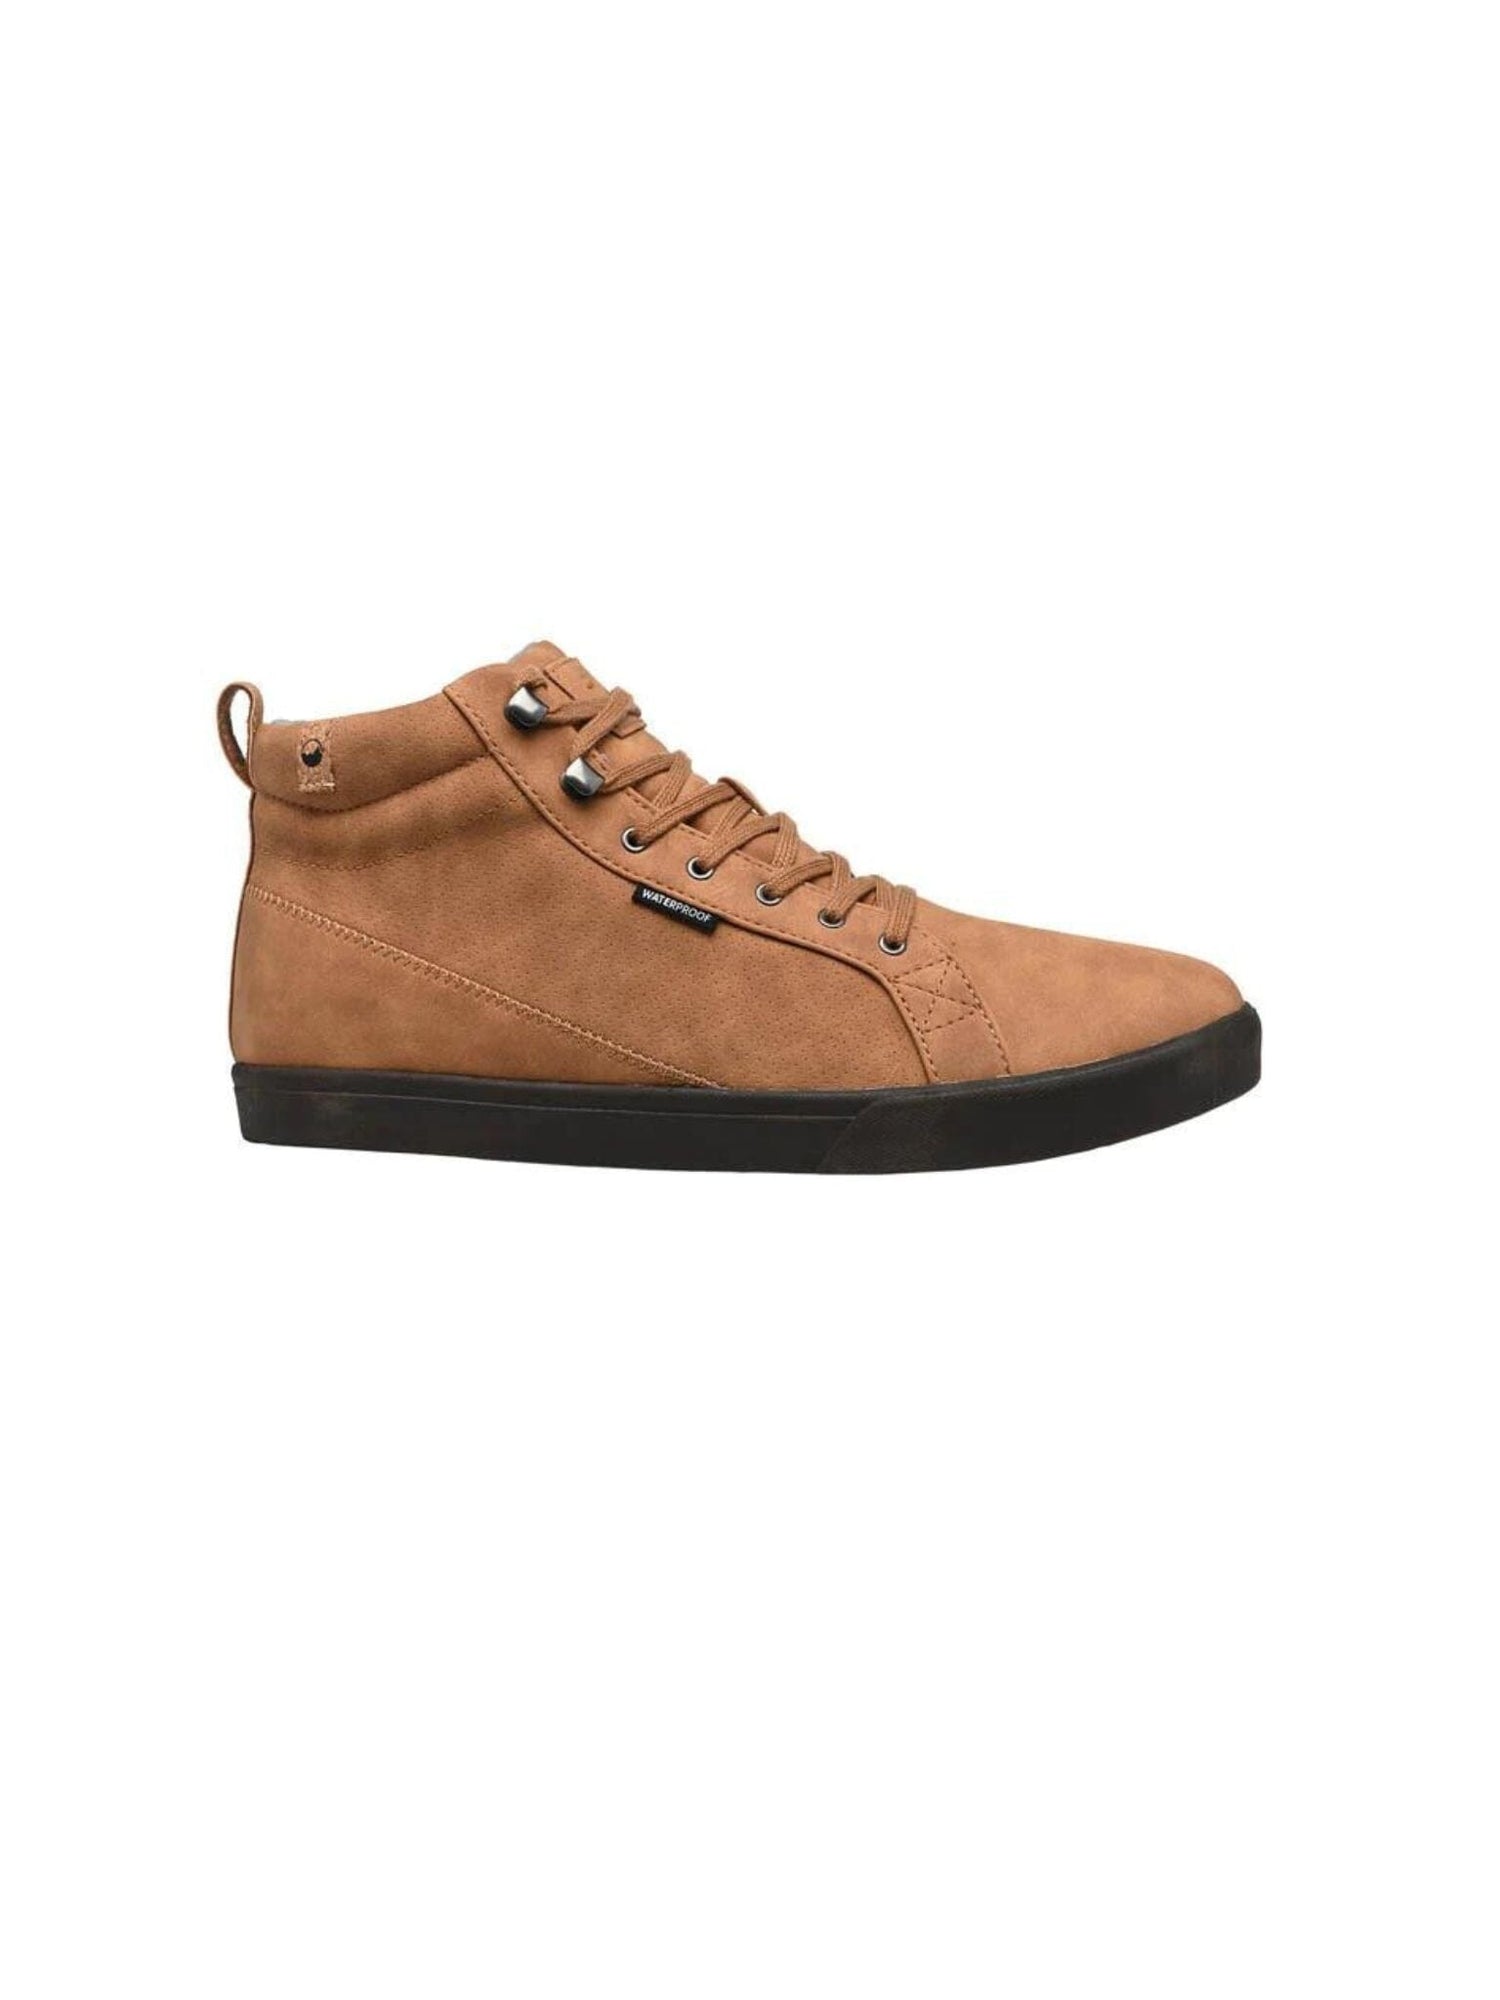 Saola M's Wanaka Waterproof Sneakers - Recycled PET and Bio-sourced materials Camel Shoes